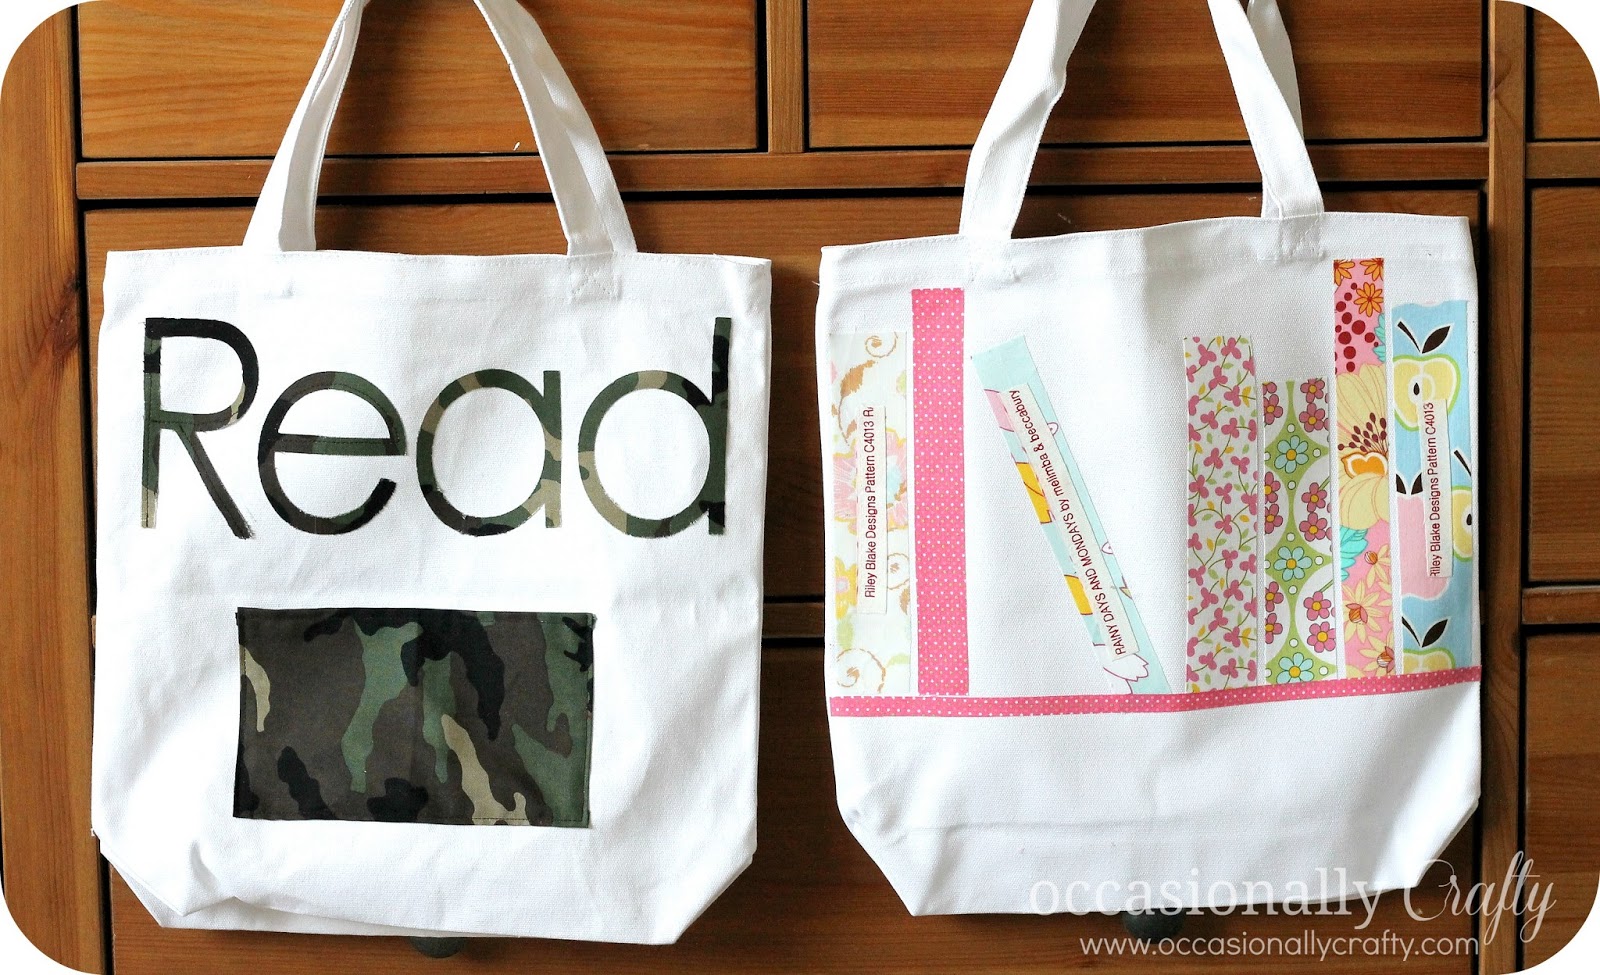 ... use my supplies to personalize some new Library Tote Bags for my kids